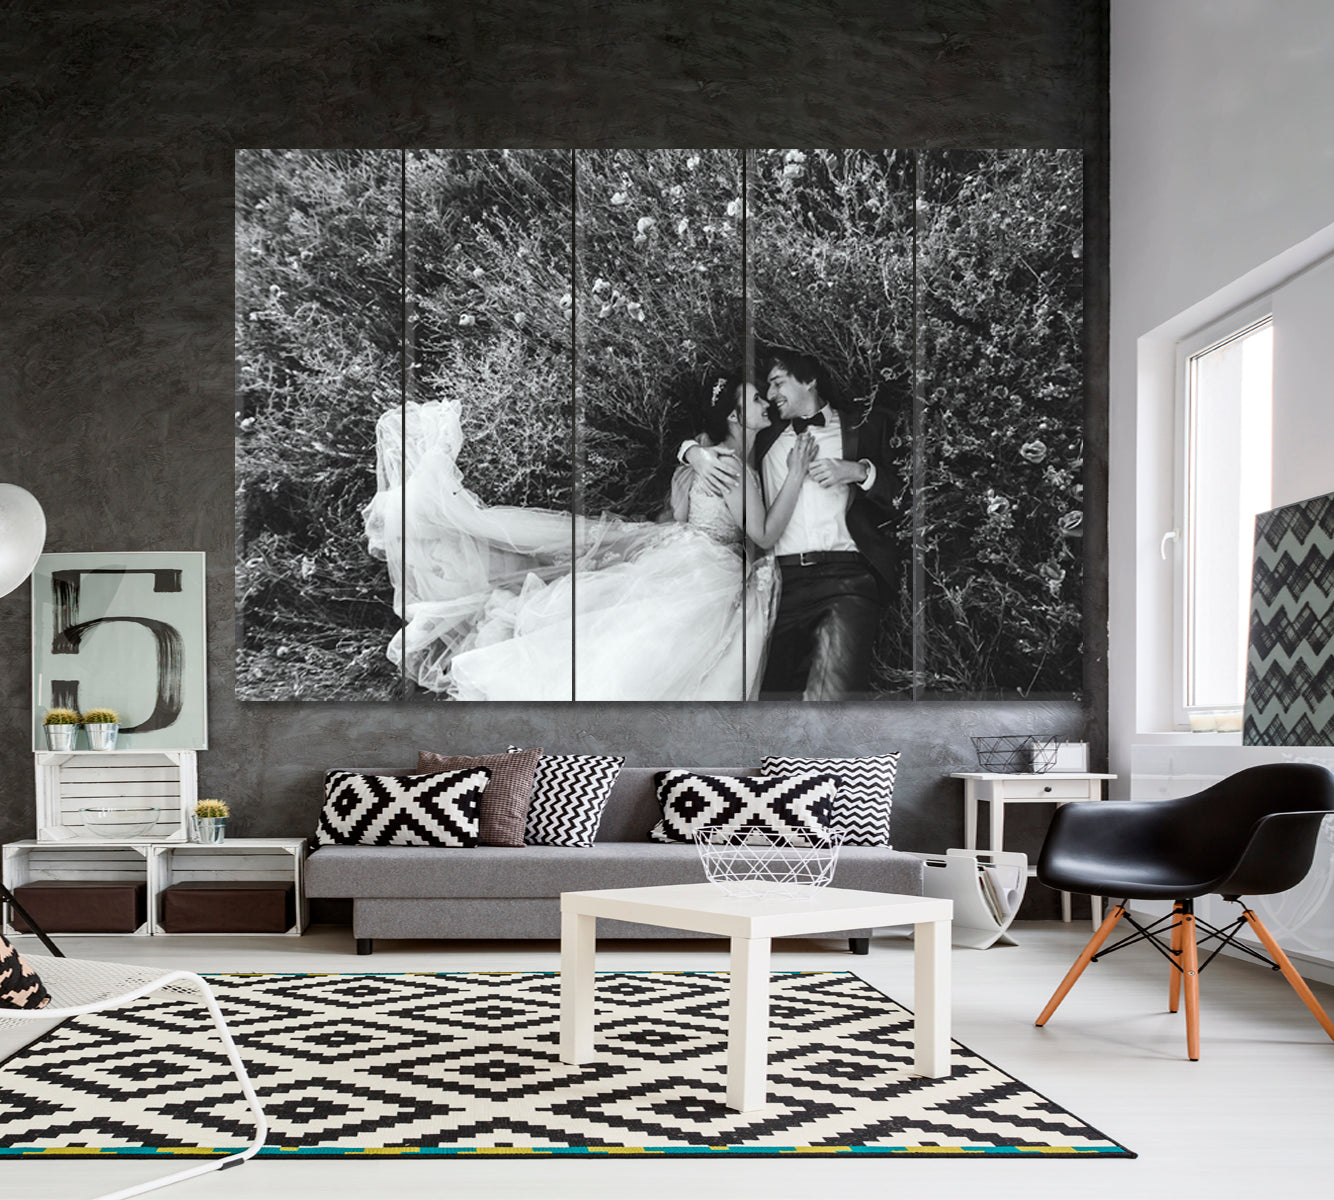 HAPPINESS Happy Life Couple Bride and Groom Wedding Love Family Marriage B&W Black and White Wall Art Print Artesty 5 panels 36" x 24" 